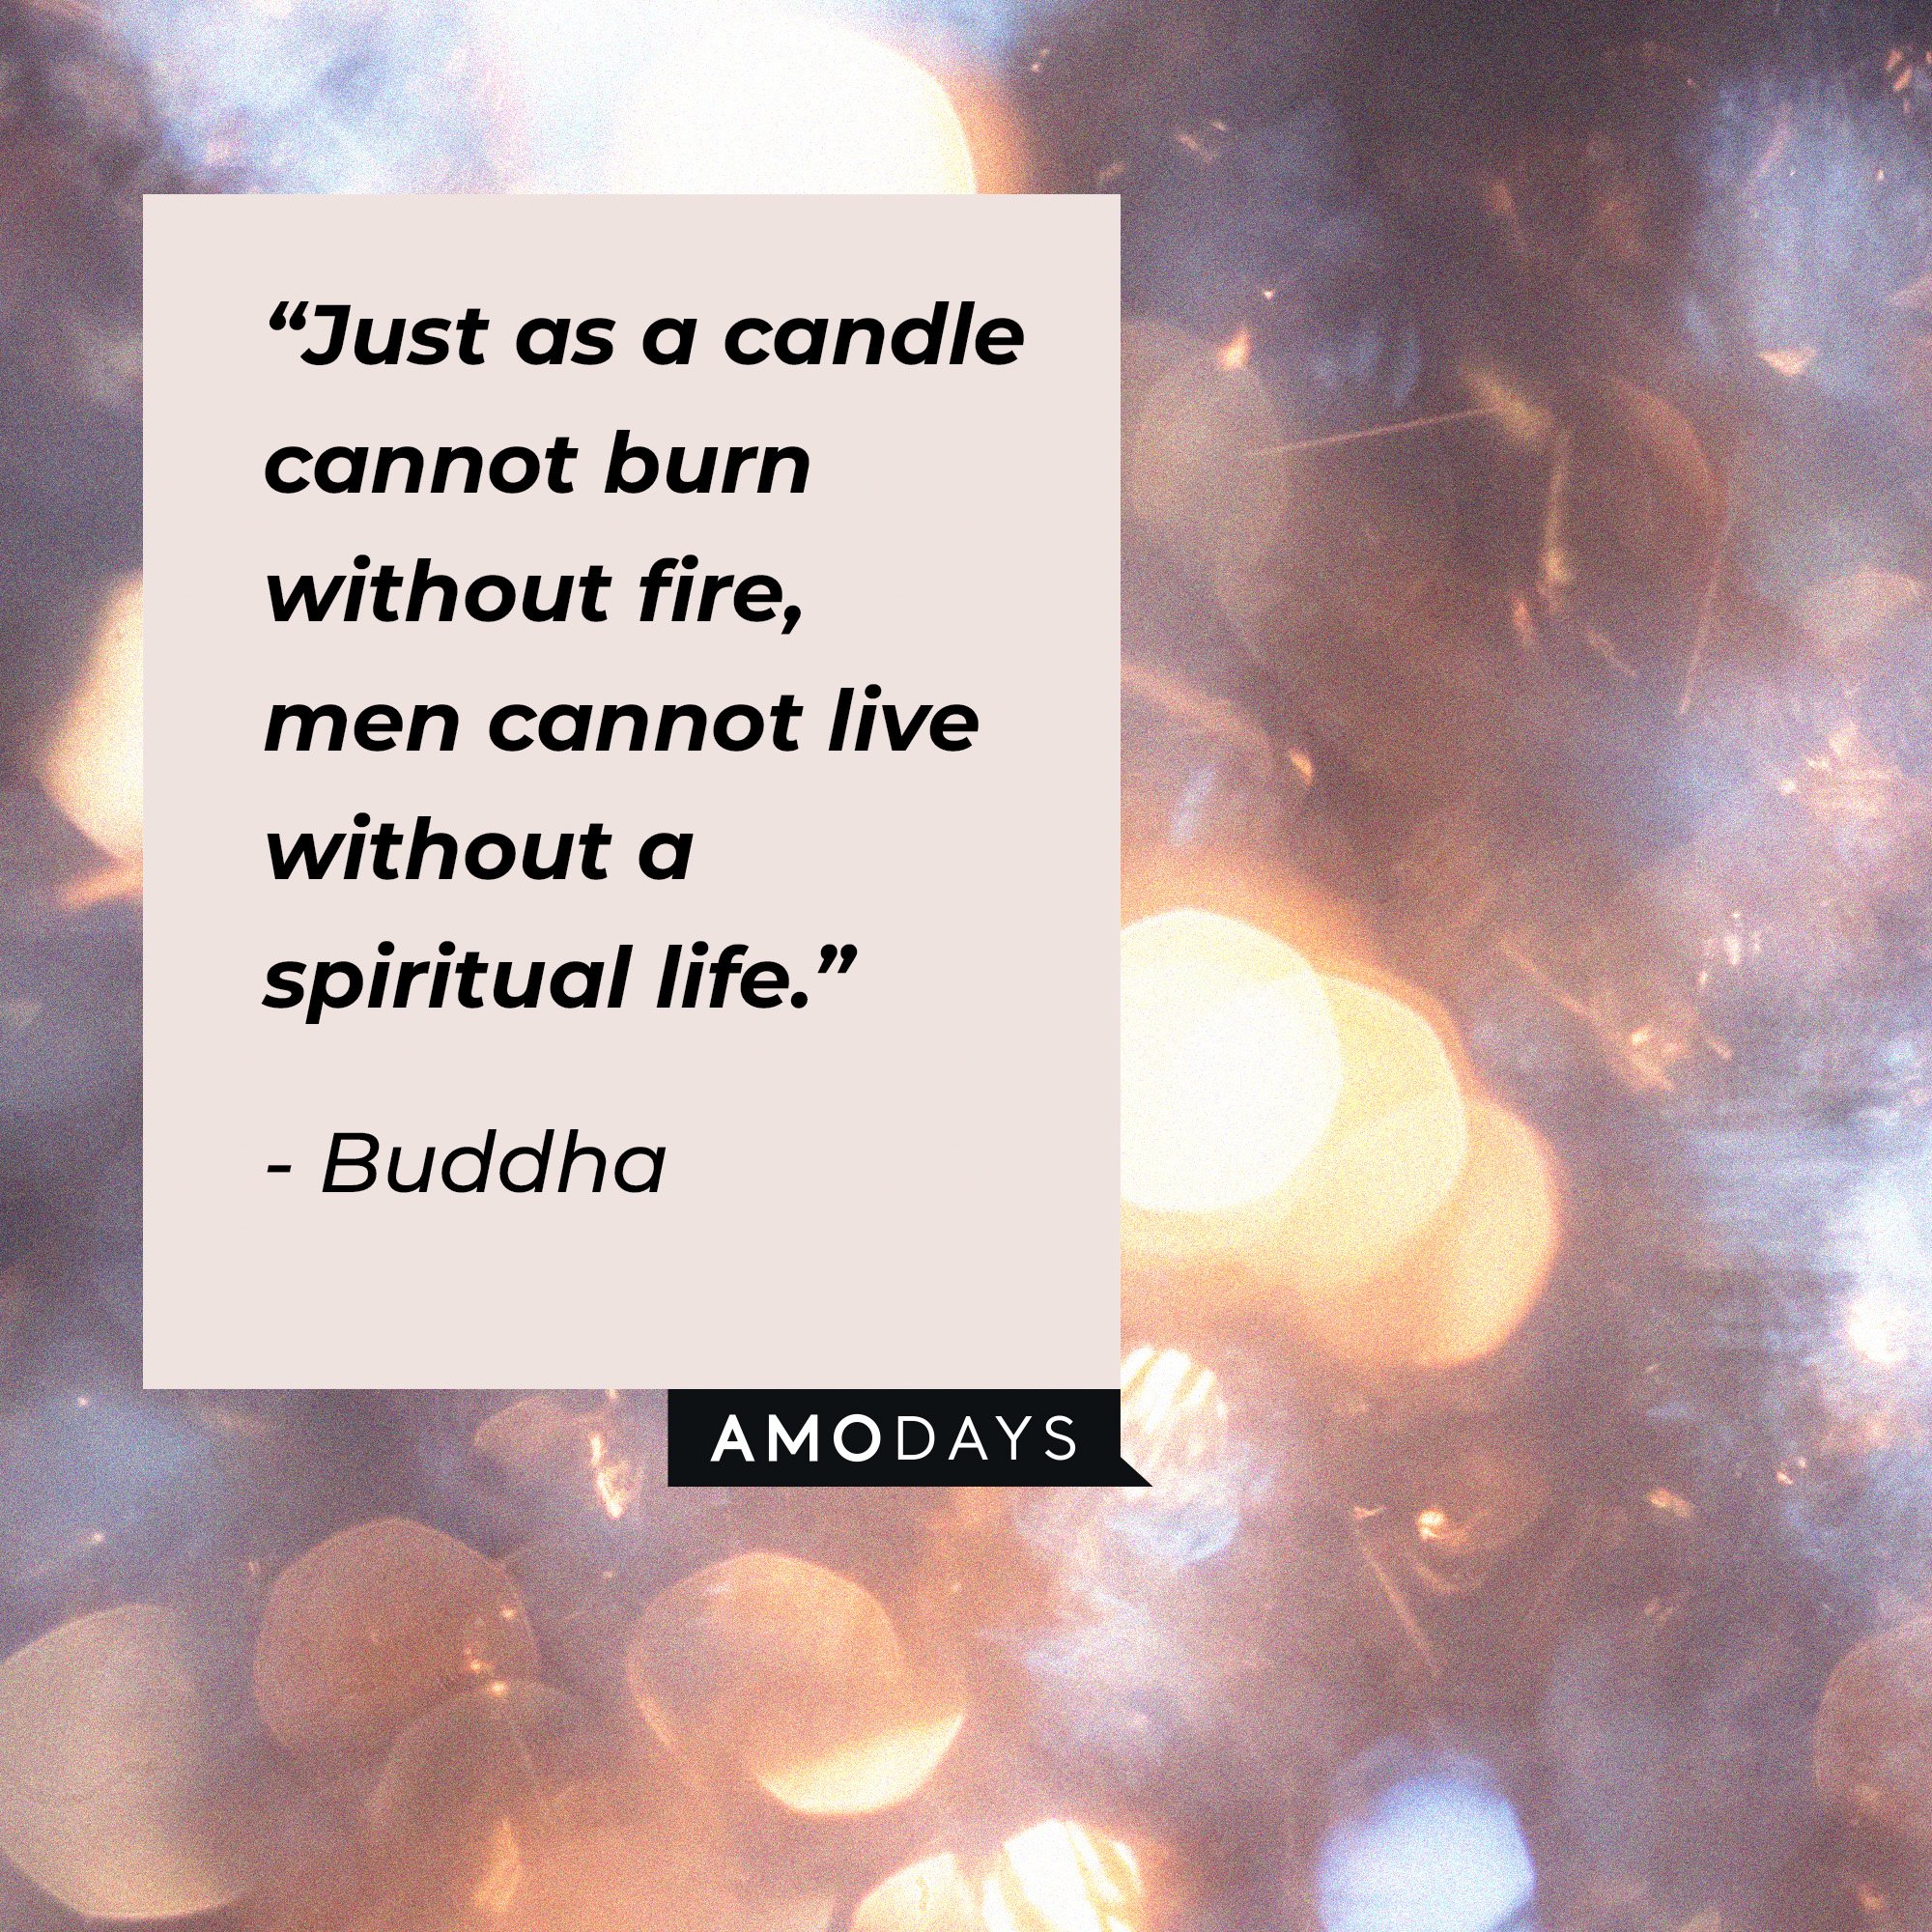 Buddha's quote: “Just as a candle cannot burn without fire, men cannot live without a spiritual life.” | Image: AmoDays